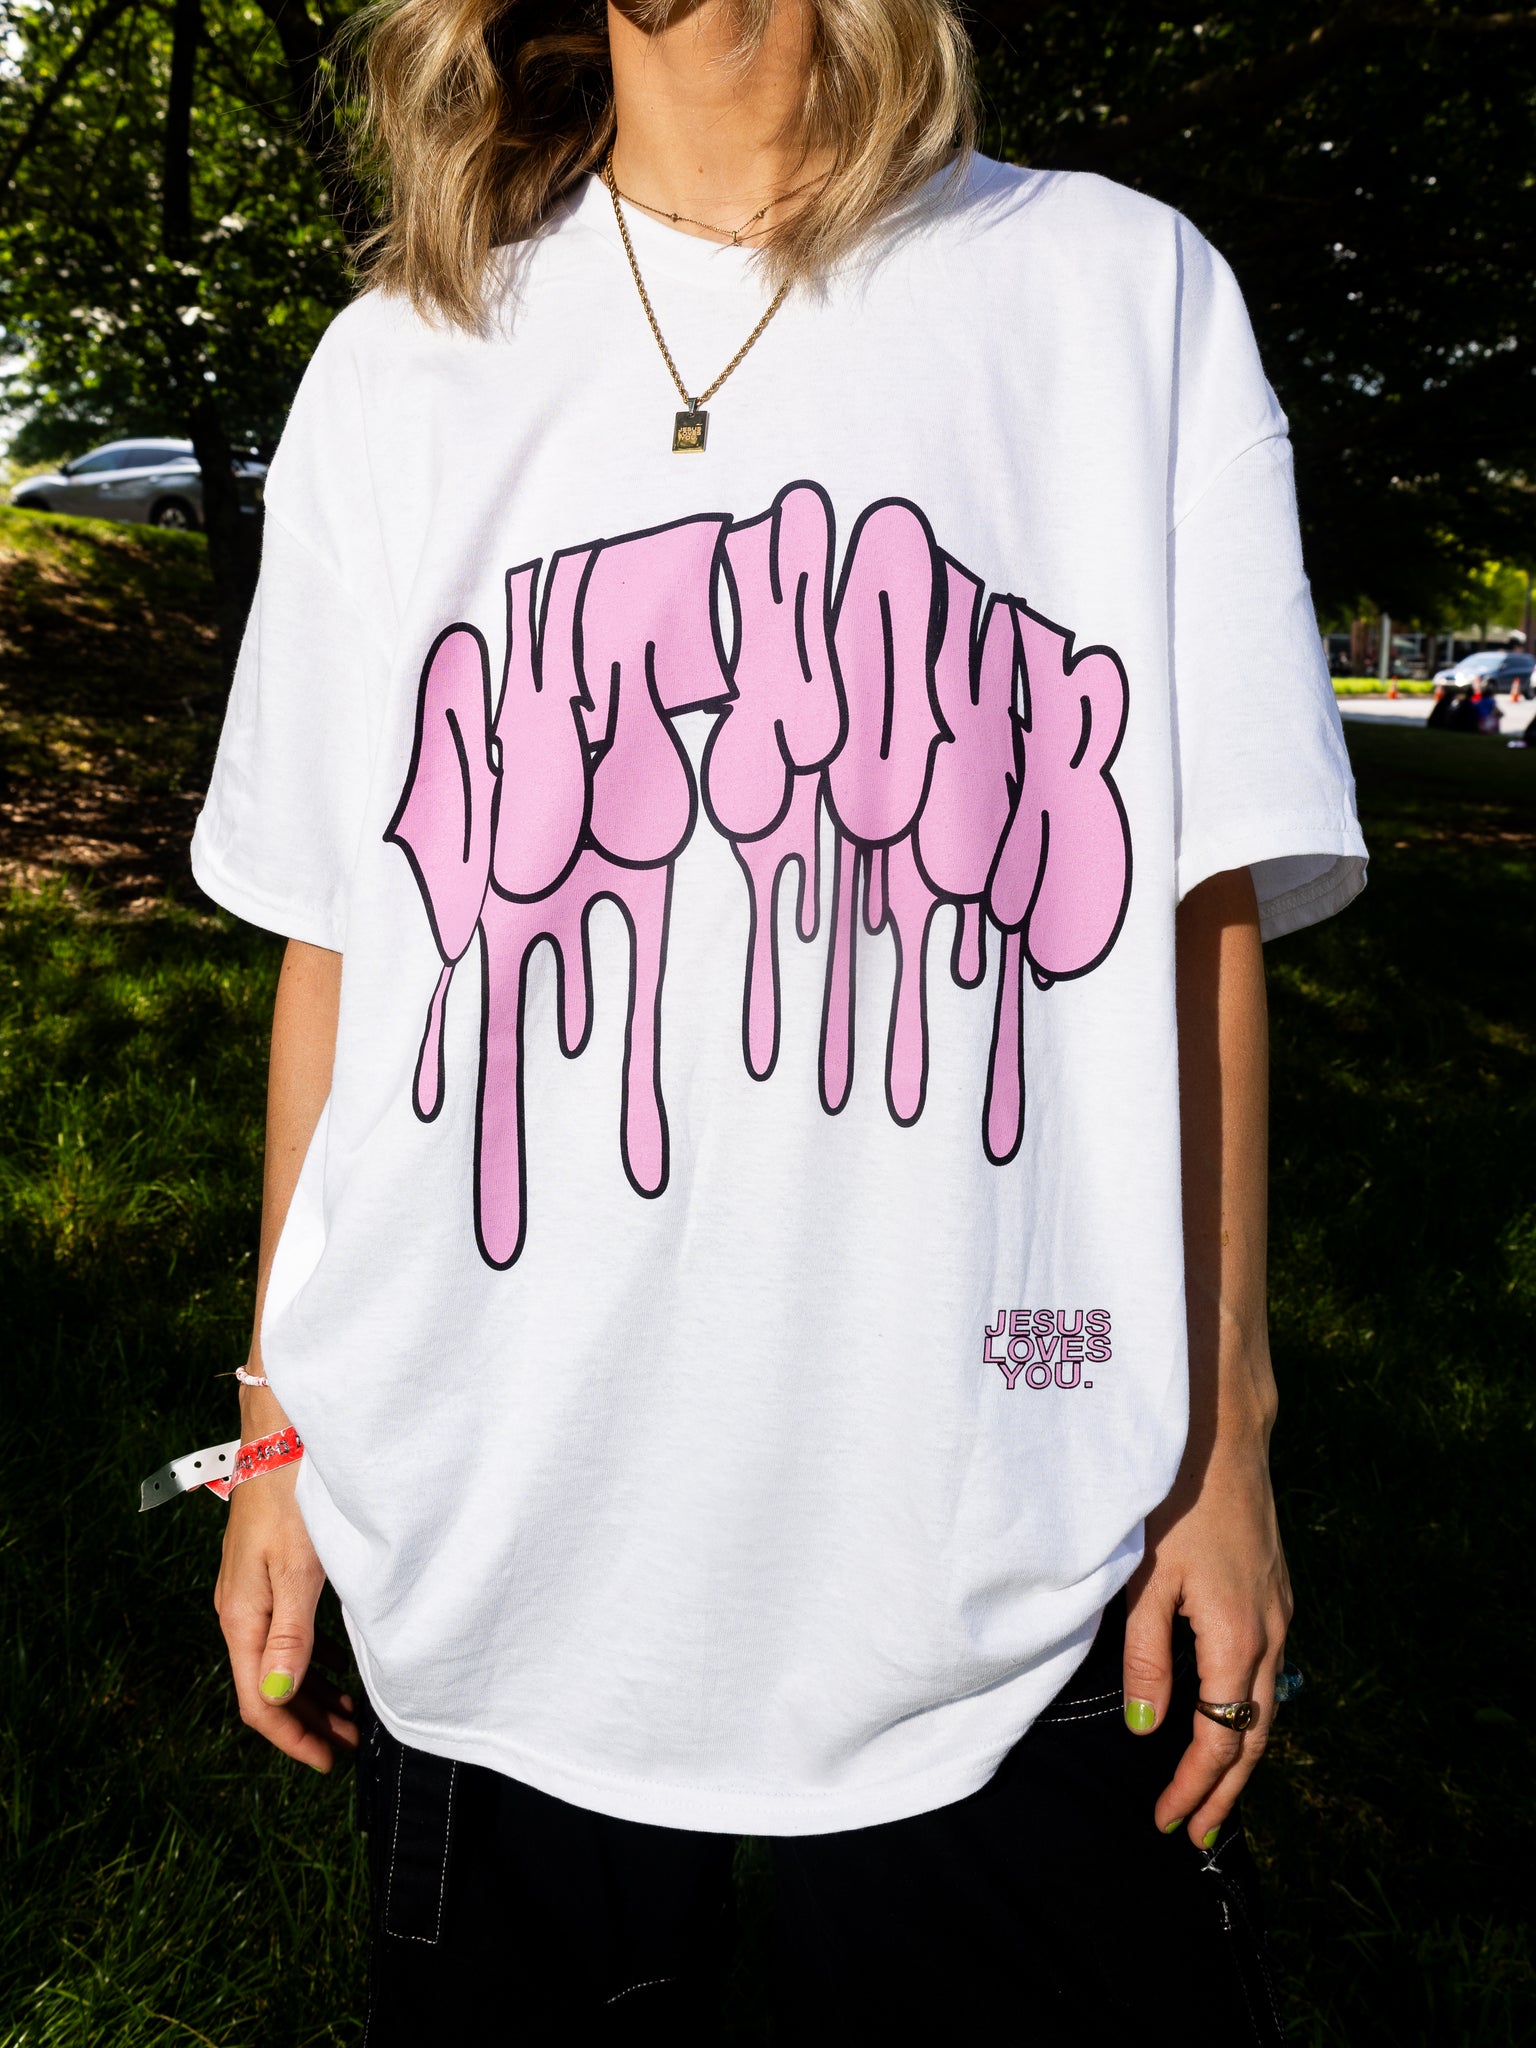 Holy Spirit "Outpour" Tee